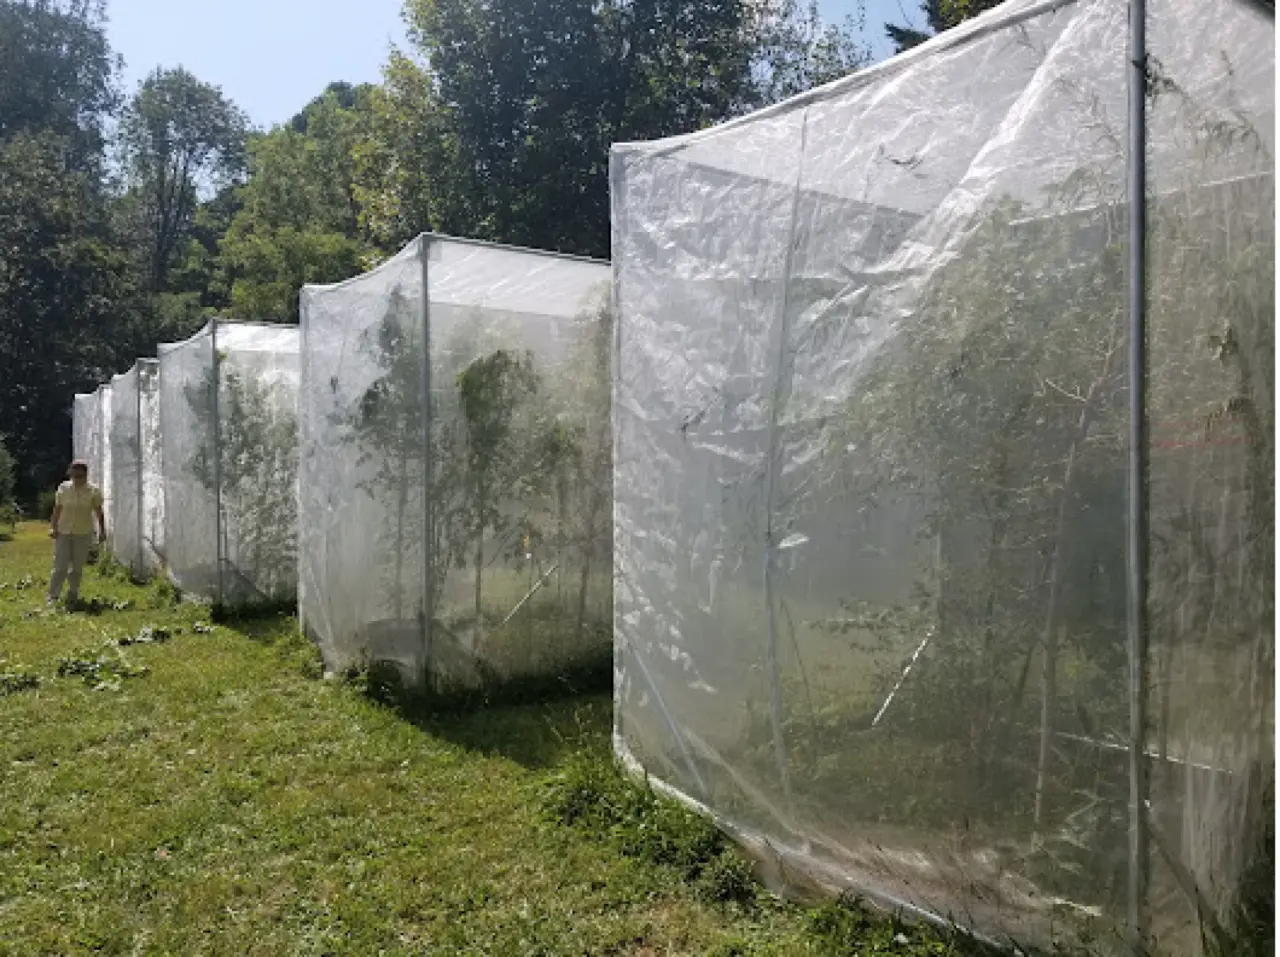 A Penn State study had four types of trees in enclosures with spotted lanternflies inside to see how growth would be affected.